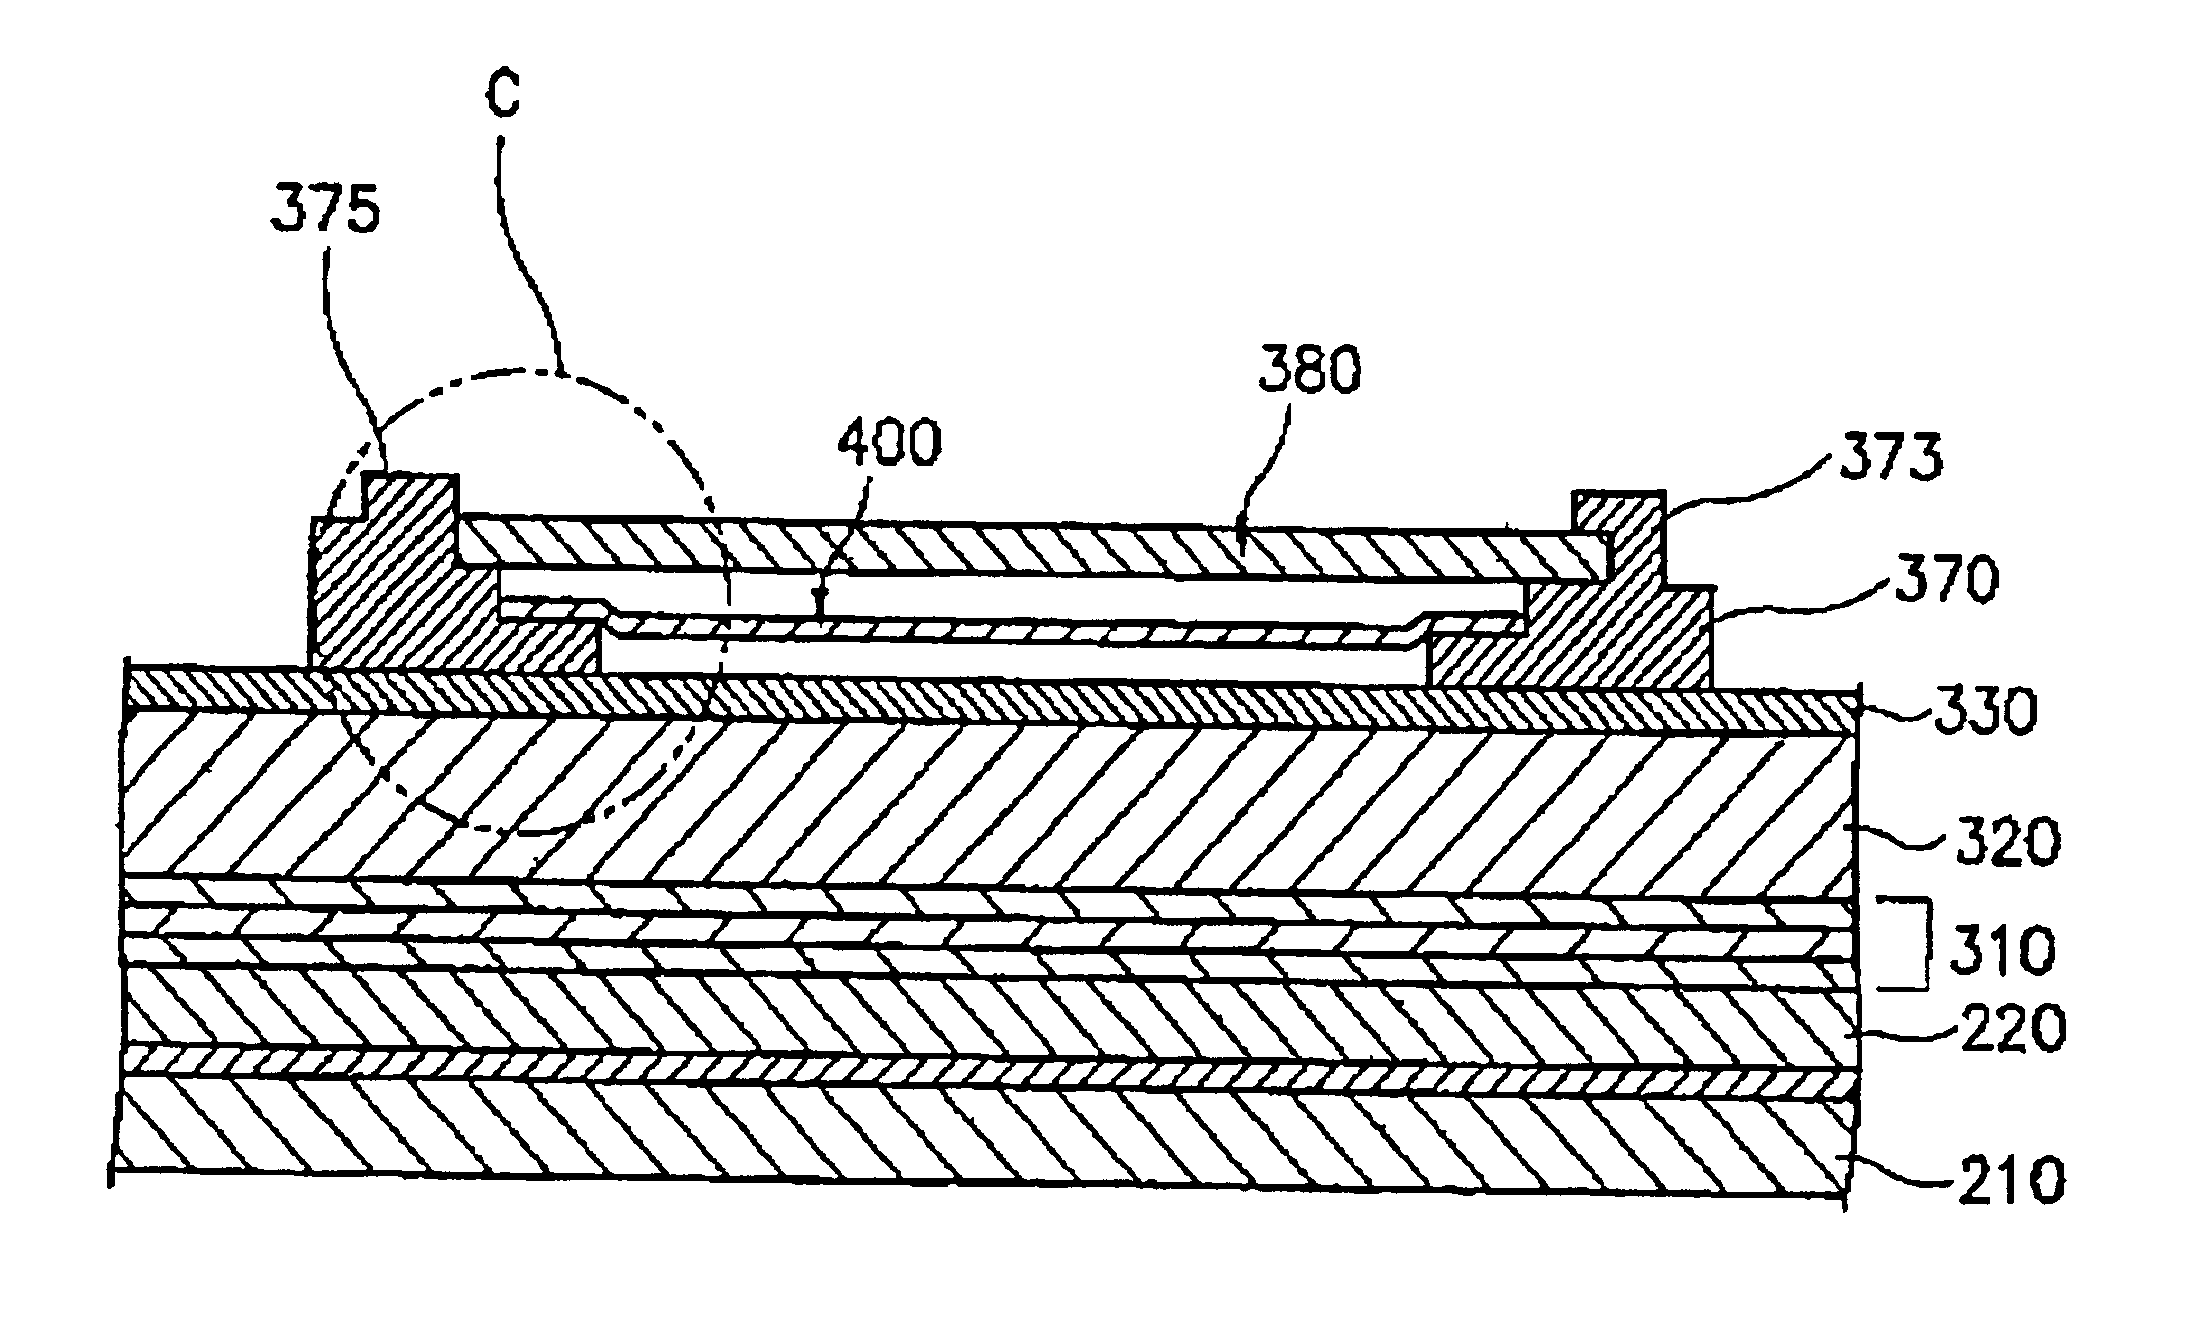 Liquid crystal display with a heat shield between the inverter and the backlight assembly